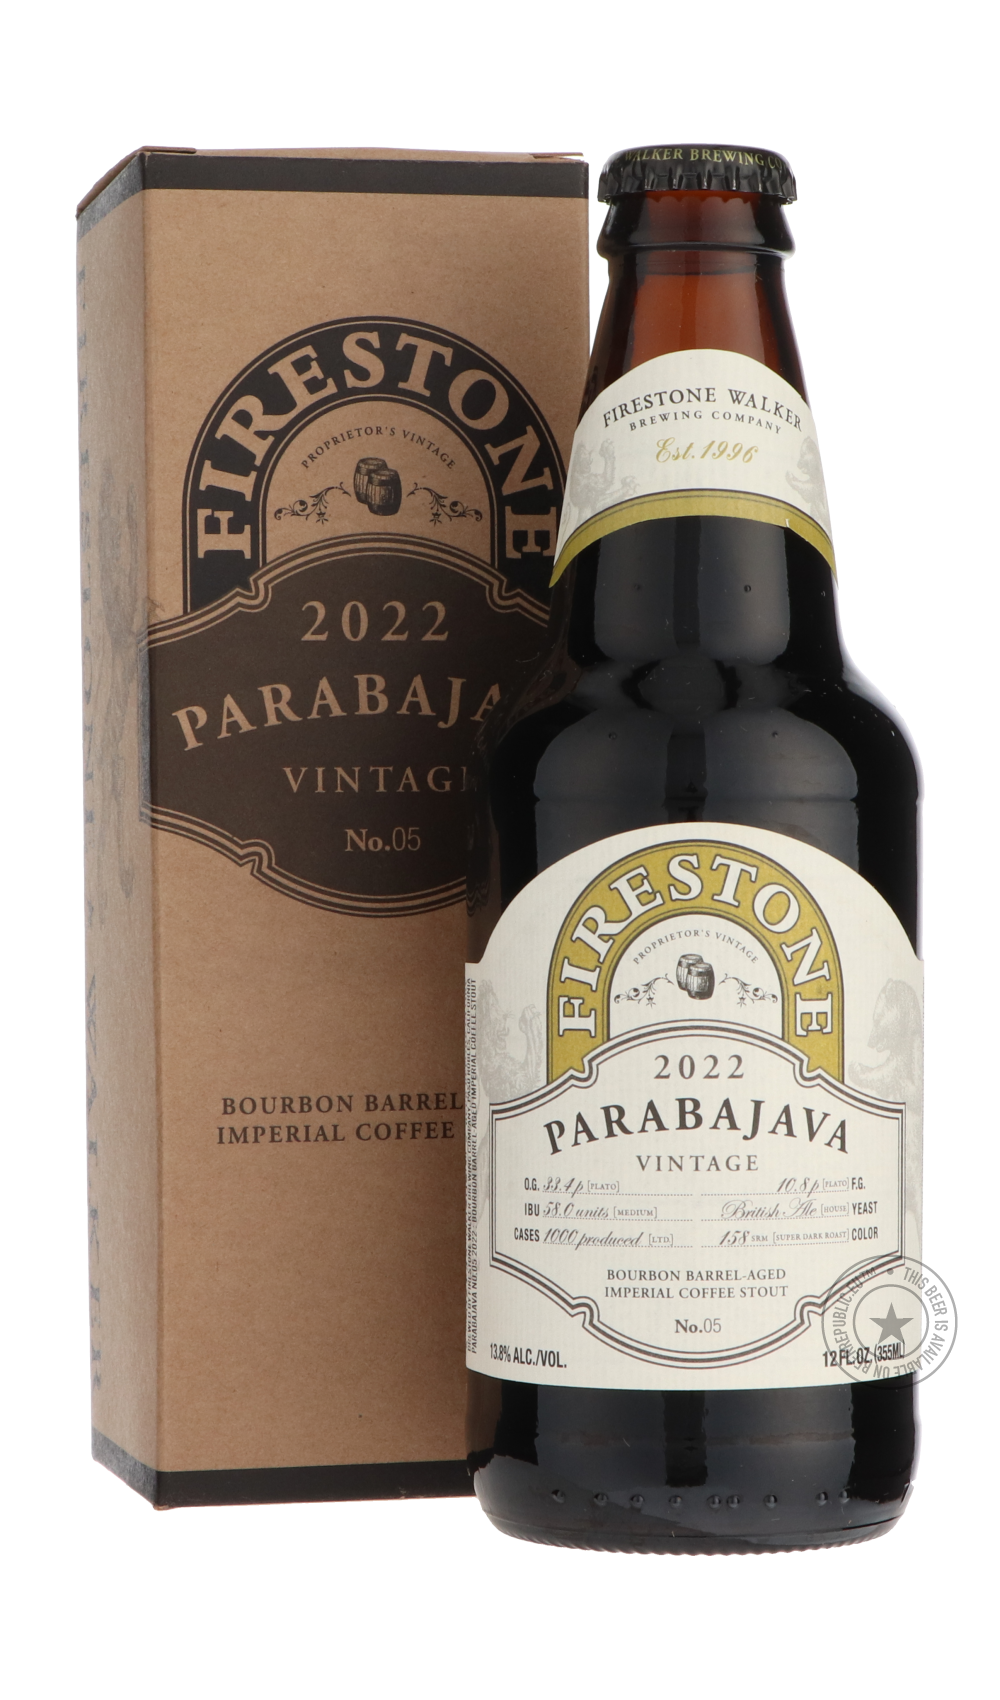 -Firestone Walker- Parabajava 2022-Stout & Porter- Only @ Beer Republic - The best online beer store for American & Canadian craft beer - Buy beer online from the USA and Canada - Bier online kopen - Amerikaans bier kopen - Craft beer store - Craft beer kopen - Amerikanisch bier kaufen - Bier online kaufen - Acheter biere online - IPA - Stout - Porter - New England IPA - Hazy IPA - Imperial Stout - Barrel Aged - Barrel Aged Imperial Stout - Brown - Dark beer - Blond - Blonde - Pilsner - Lager - Wheat - Weiz